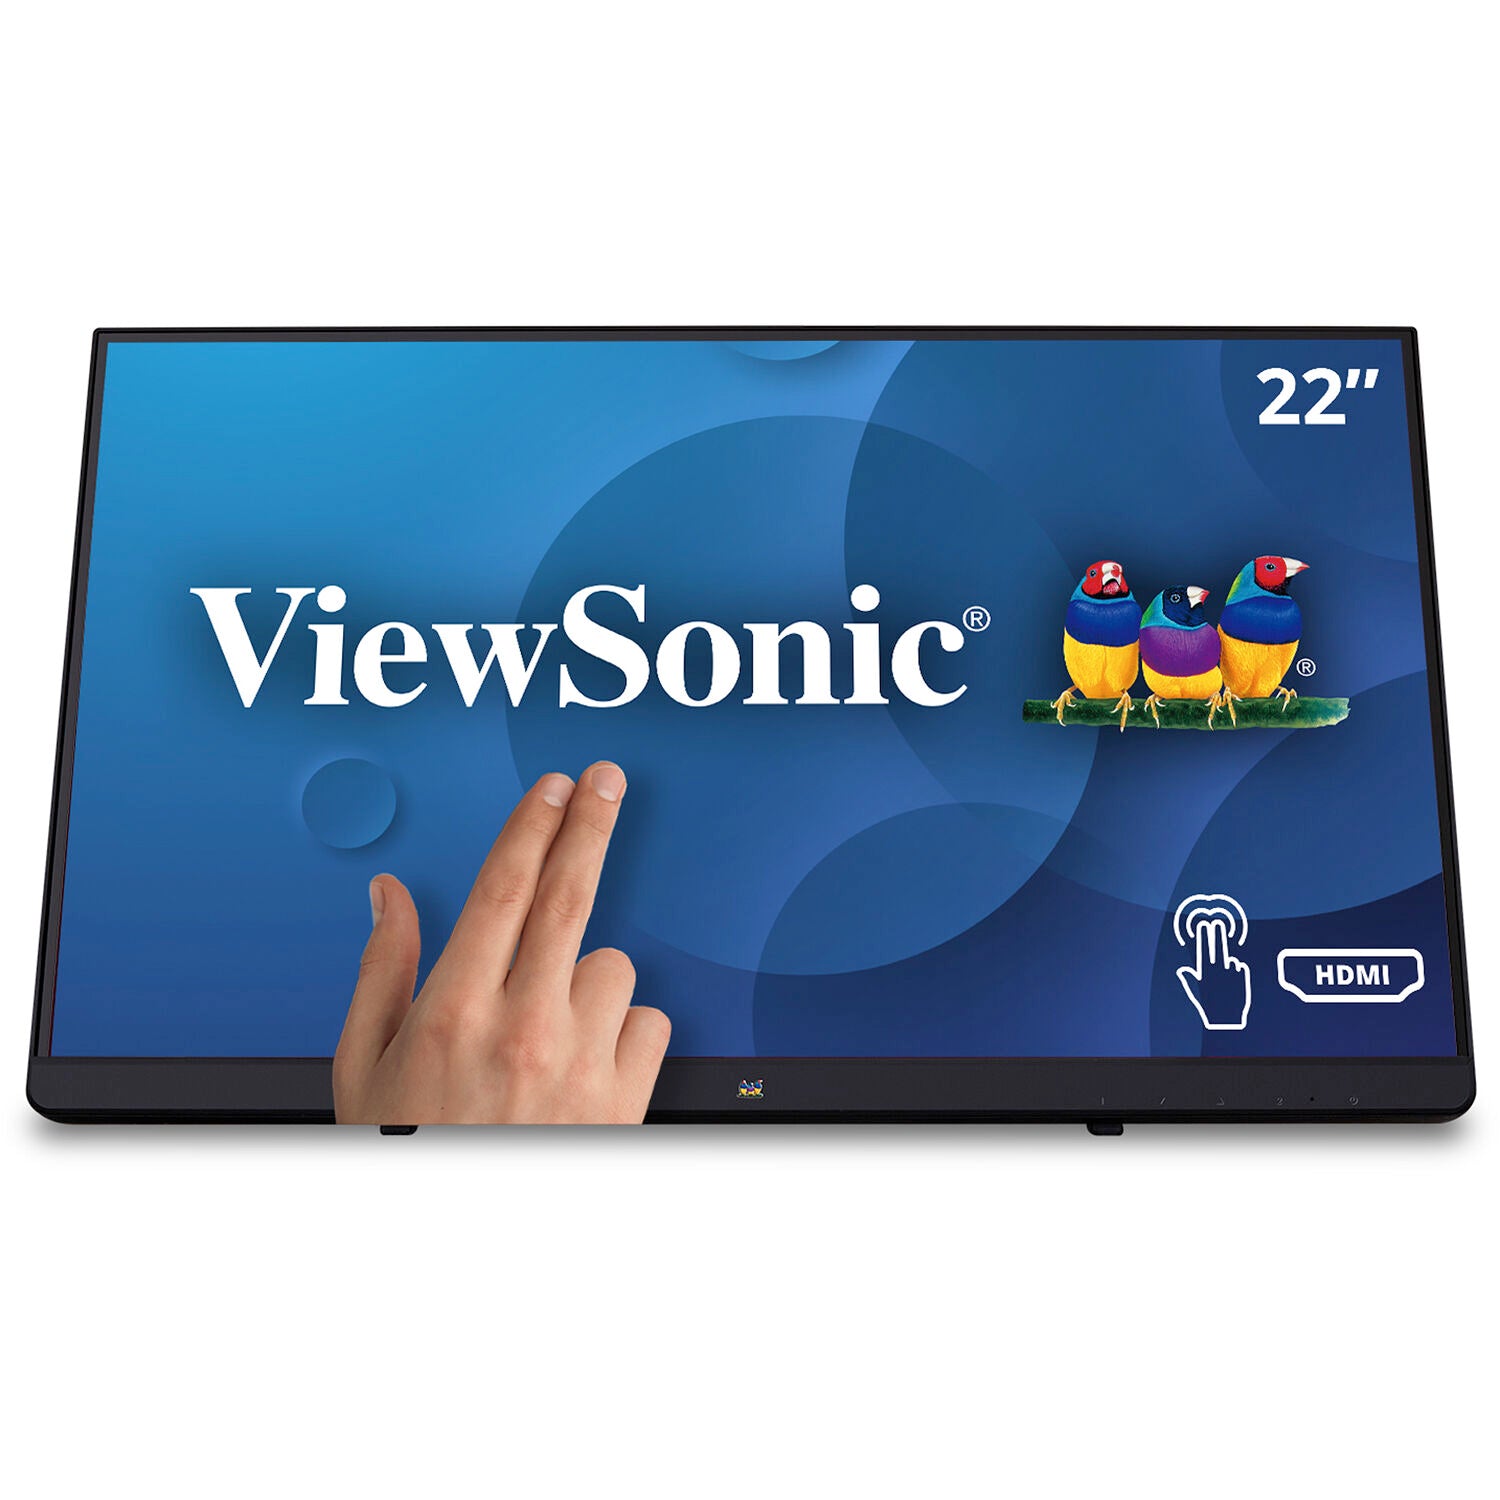 ViewSonic TD2230-S 22" Full HD Multi-Touch Display Monitor - Certified Refurbished